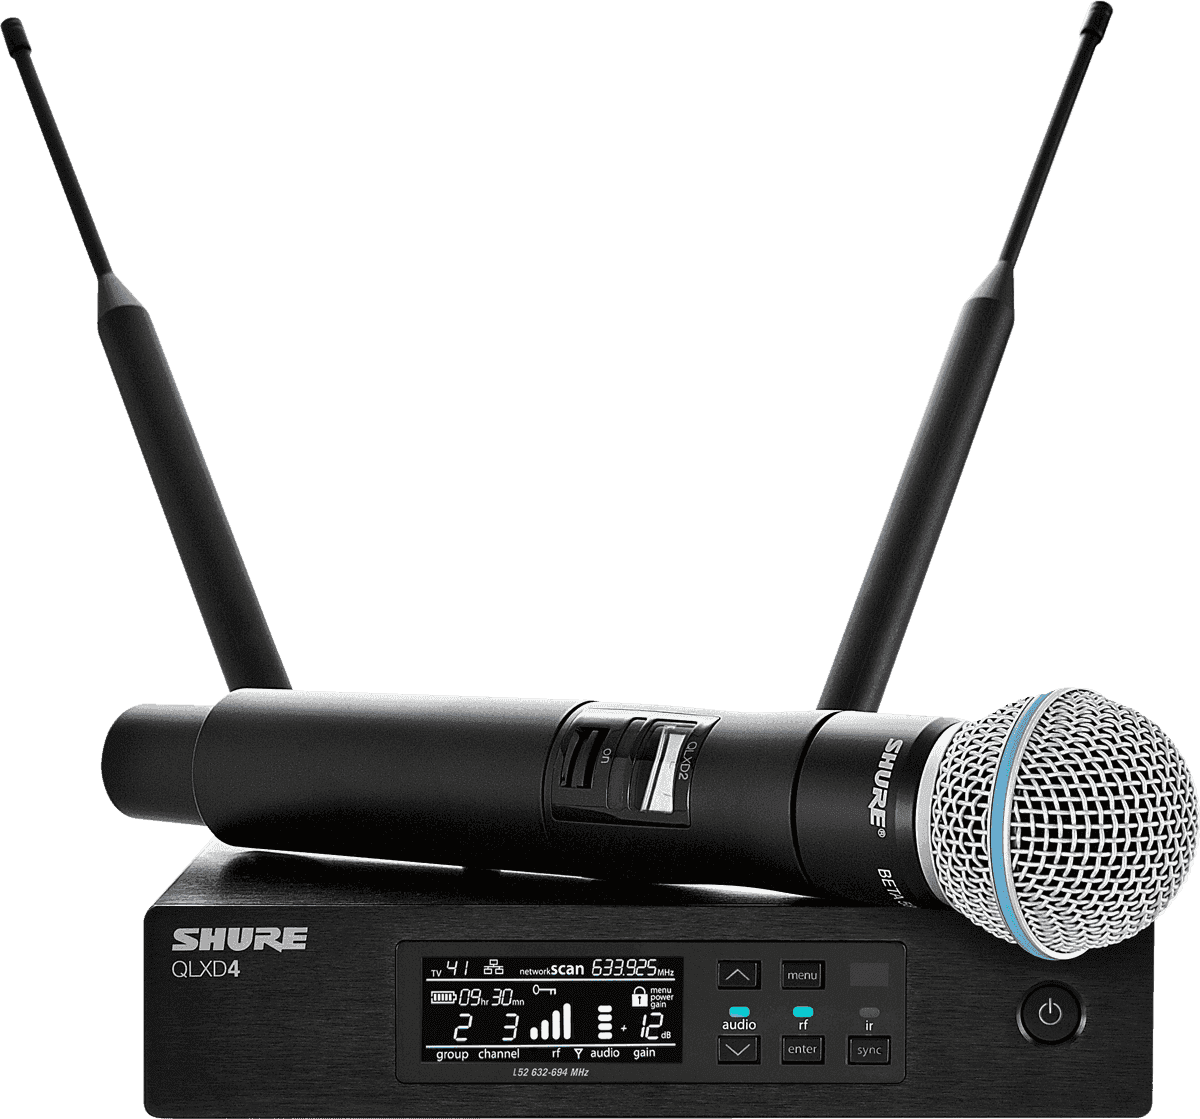 Shure Qlxd24-b58-h51 - Wireless handheld microphone - Main picture